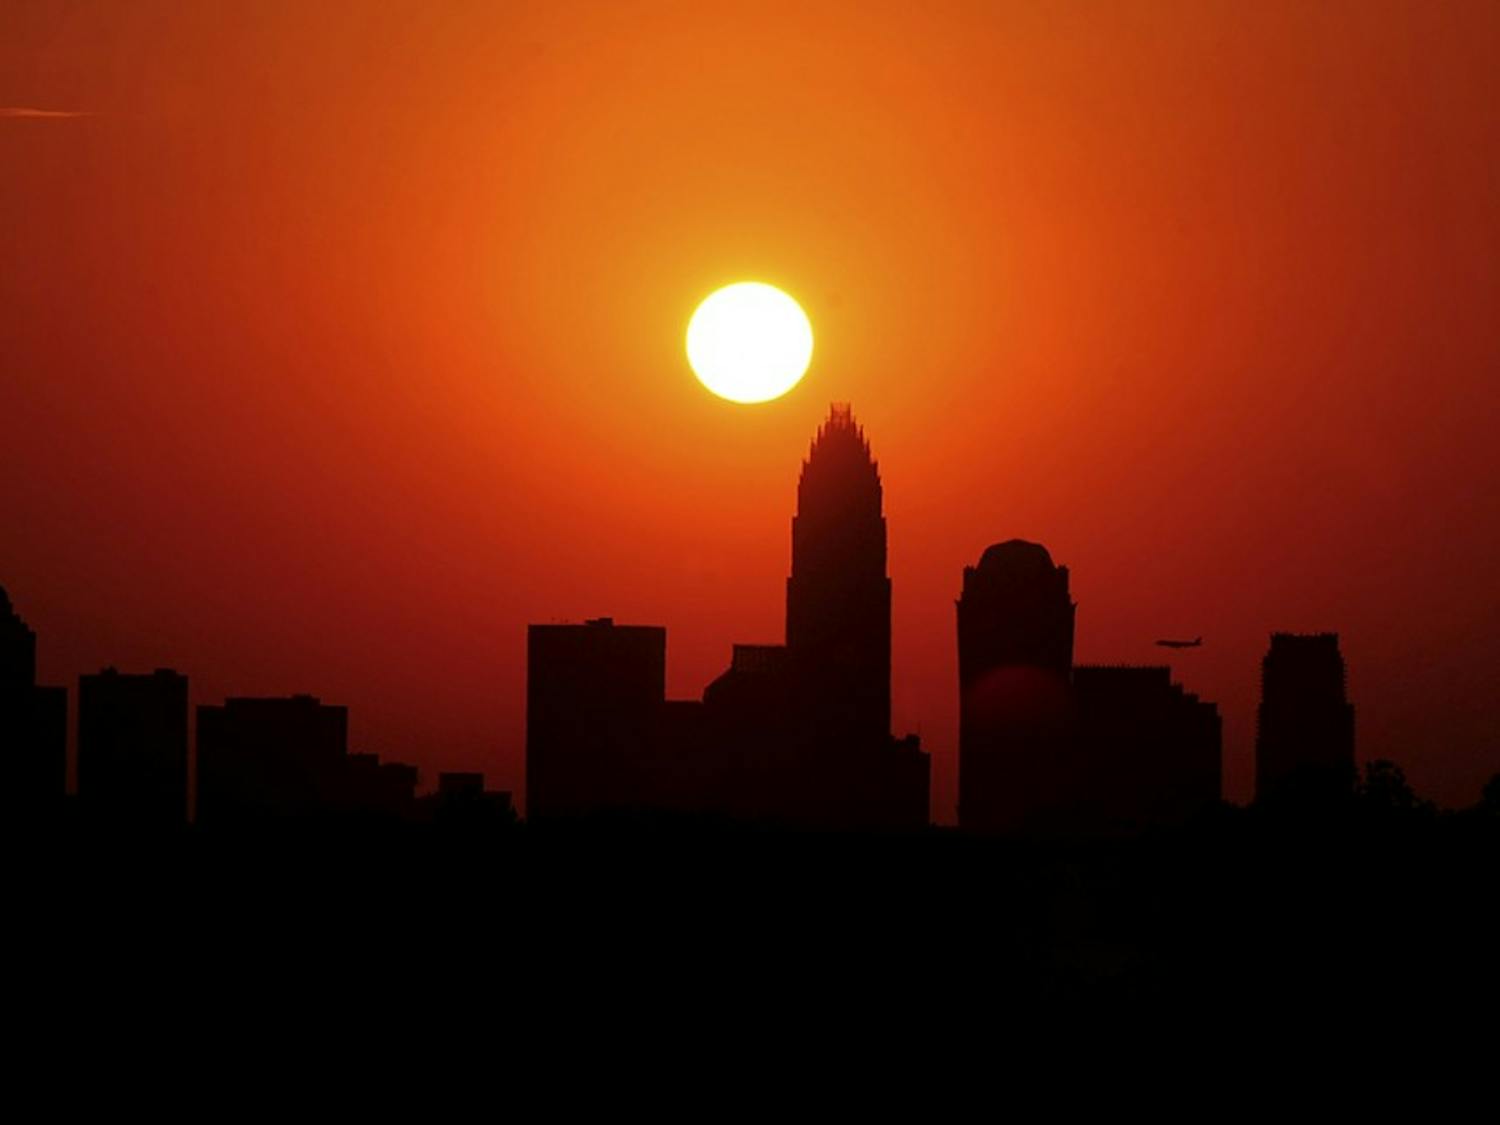 The skyline of Charlotte, North Carolina, is silhouetted against the sky as the sun sets on Friday, June 29, 2012. Charlotte equalled its all-time high temperature record Friday with a 104-degree day entering the record books. (Jeff Siner/Charlotte Observer/MCT)